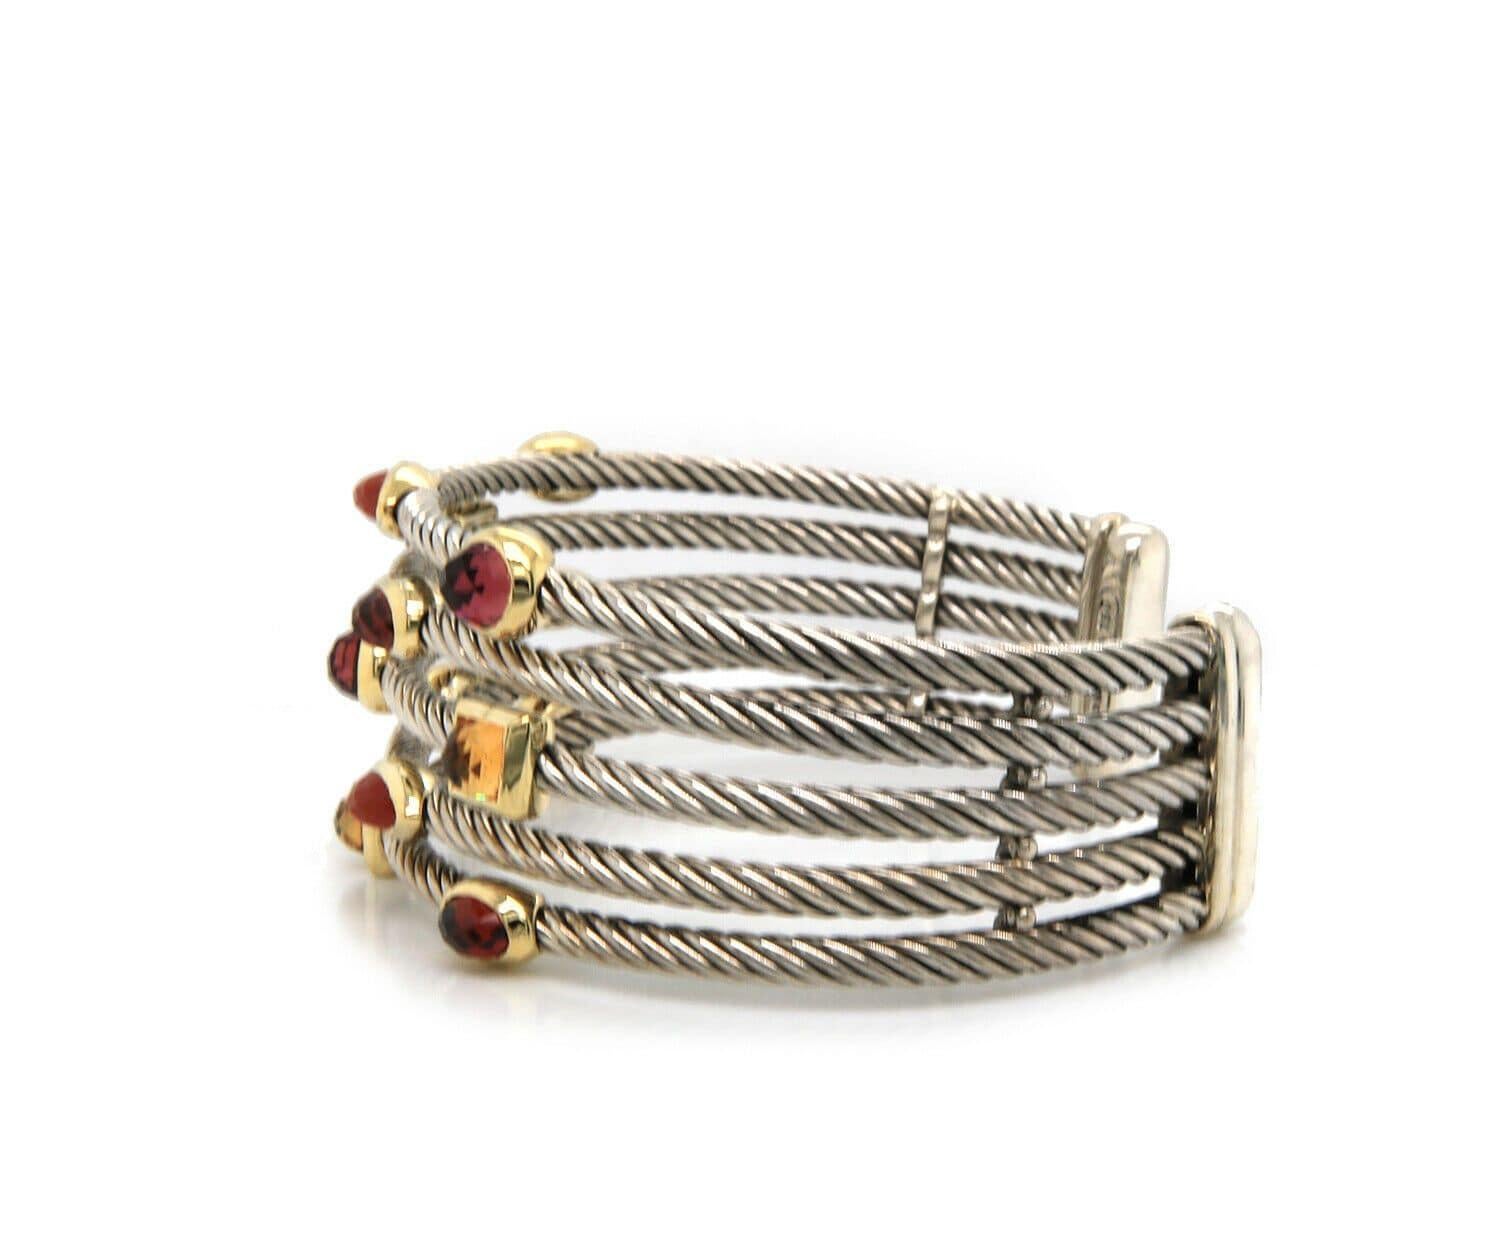 David Yurman Confetti Five Row Cuff Bracelet in 18K and Sterling

David Yurman Confetti Five Row Cuff Bracelet
18K Yellow Gold
Sterling Silver
Bracelet Width: Approx. 24.0 MM
Bracelet Size: Approx. 6.75 Inches
Weight: Approx. 54.90 Grams
Stamped: